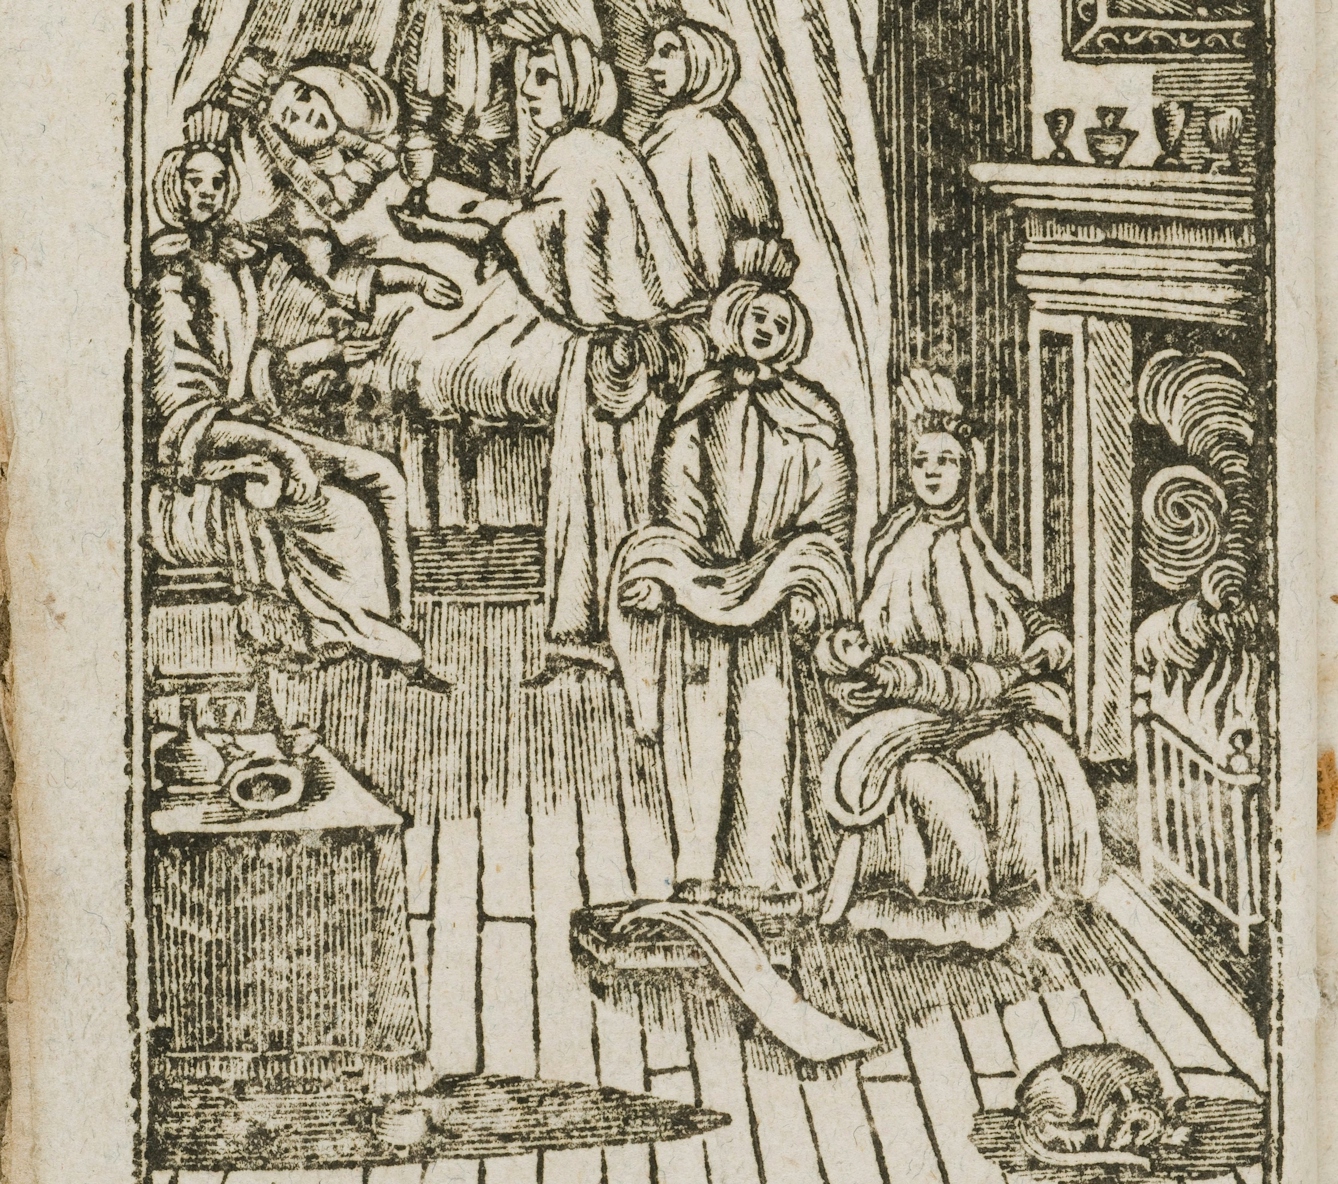 Black and white etching showing a midwife holding a baby on her lap in front of the fire. A lady lies in a bed behind, recovering from having just given birth.